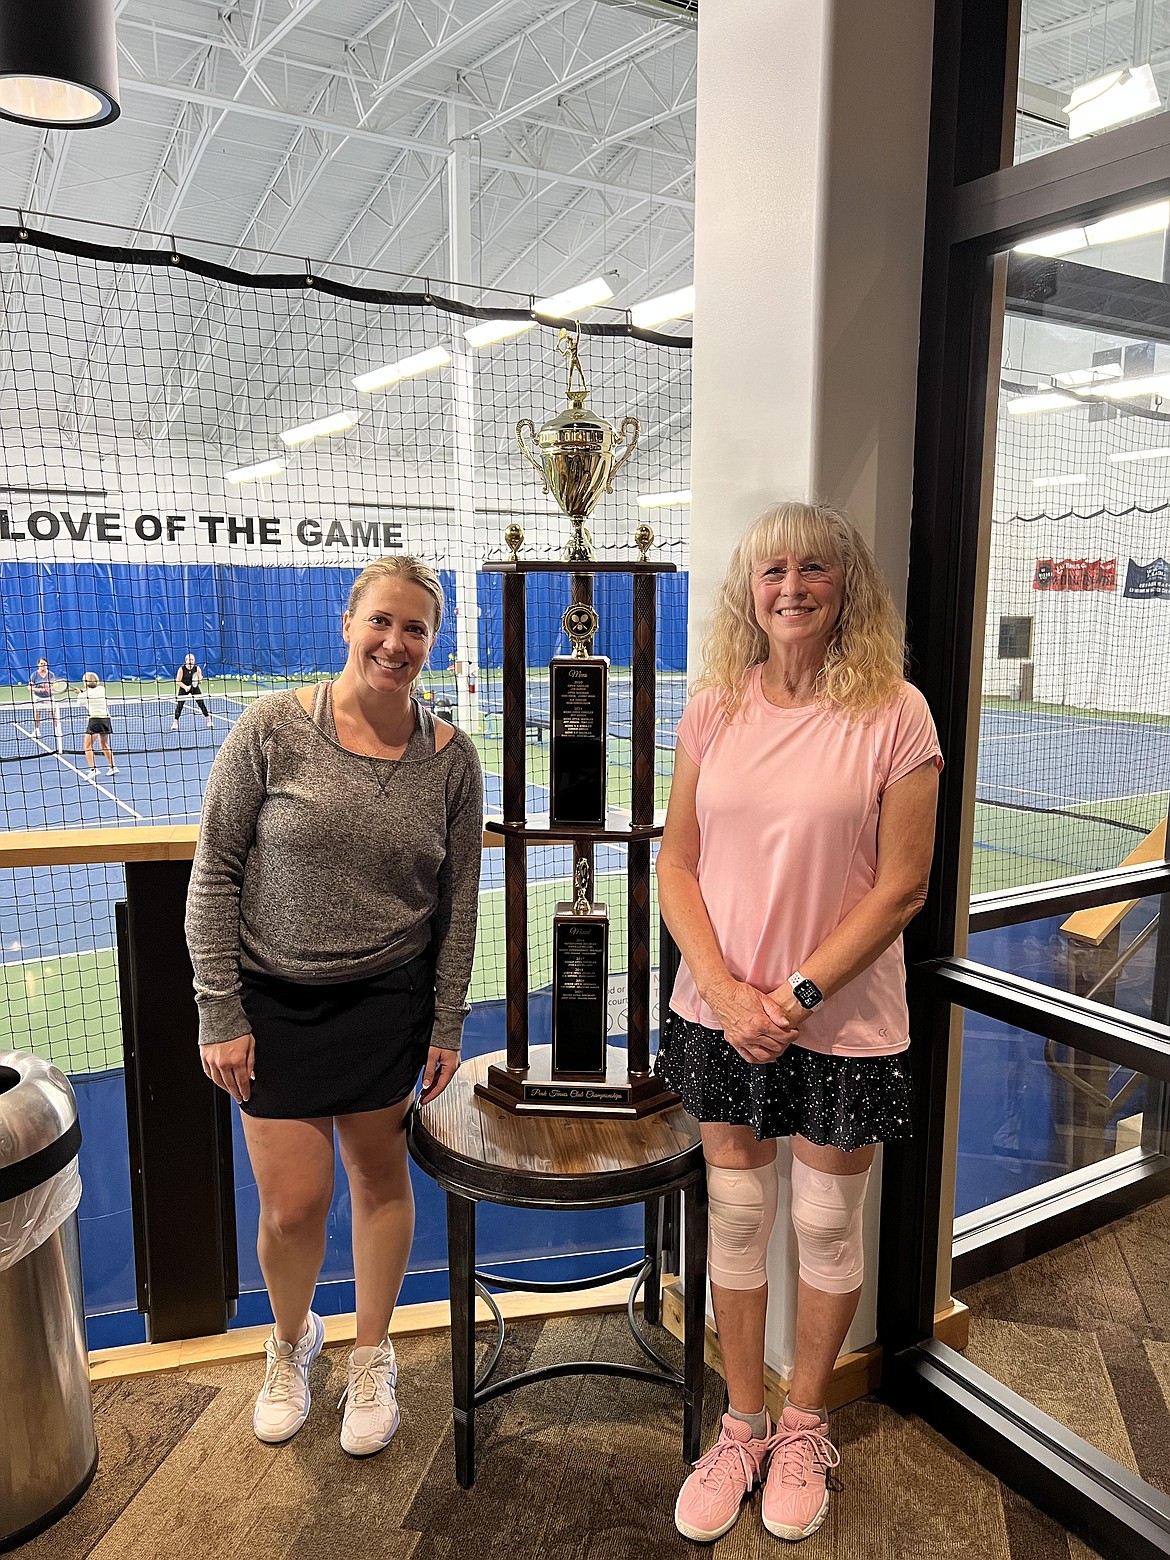 Courtesy photo
The women's 3.5 doubles champions at the recent Peak Hayden member tennis tournament were Katie Miller, left, and Patty Pennel, who defeated Carole Wolff and Deborah Hurd 6-2, 4-7, 10-4.